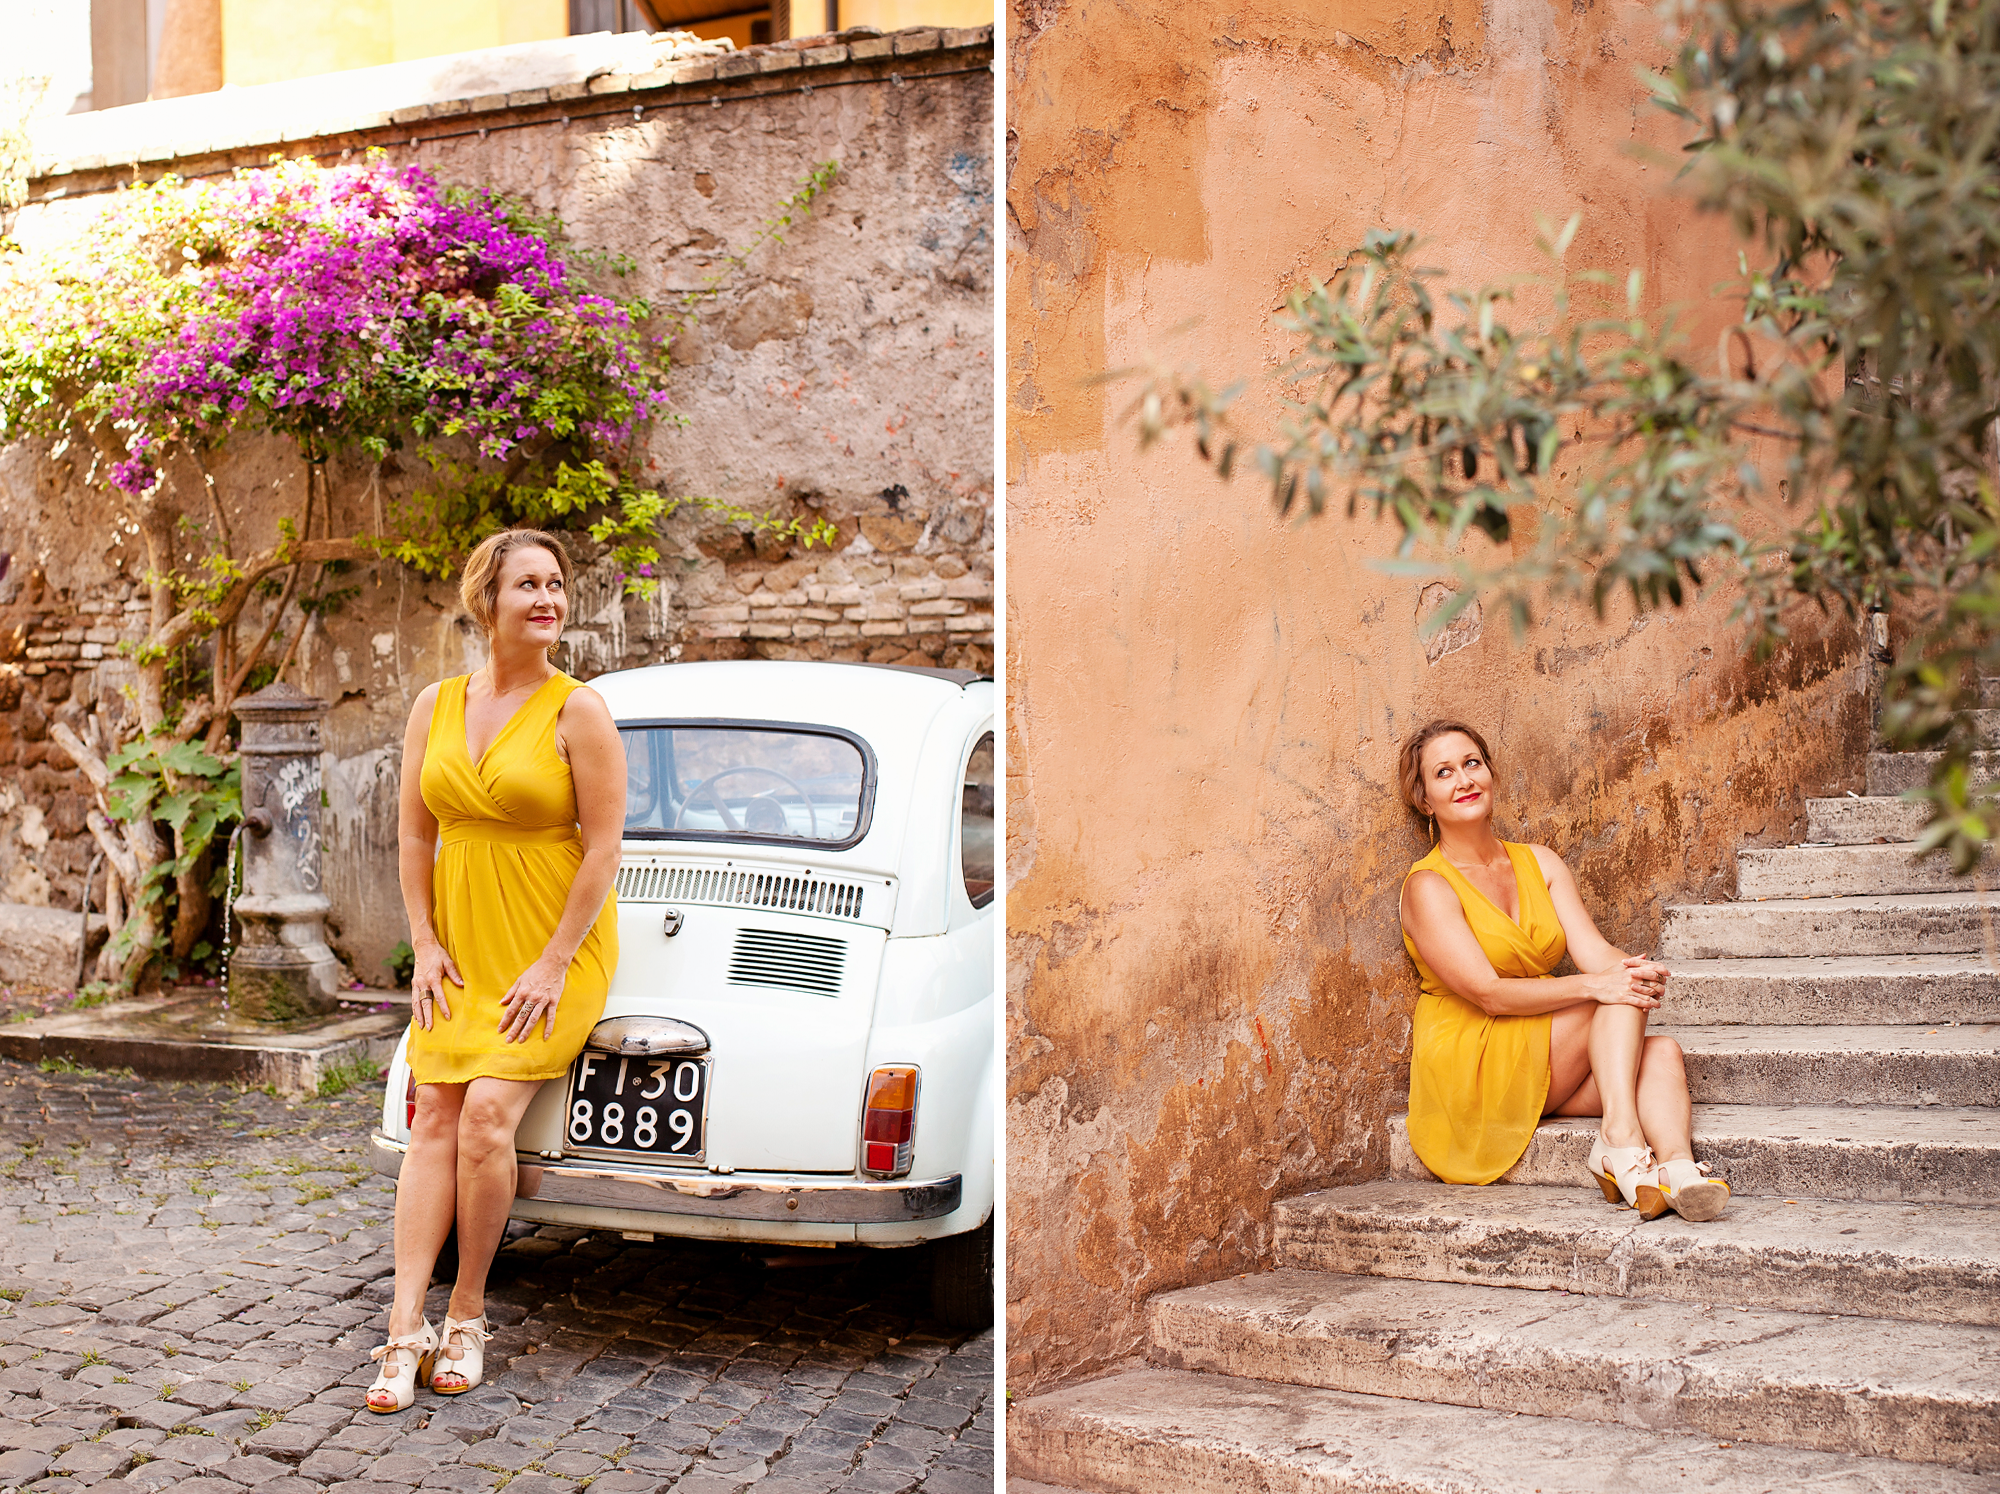 Honeymoon, vacation, family, engagement, maternity, love story individual and solo photoshoots in Rome, Italy by photographer Tricia Anne Photography | Rome Photographer, vacation, tripadvisor, instagram, fun, married, love, story, photography, session, photoshoot, wedding photographer, vacation photographer, engagement photo, honeymoon photoshoot, rome honeymoon, rome wedding, elopement in Rome, honeymoon photographer rome, Rome Solo Photo shoot, Rome Photography, Photo Shoot Trastevere, Solo trip to Rome, What to do in Rome, Solo traveler, Trastevere, Trastevere photo shoot